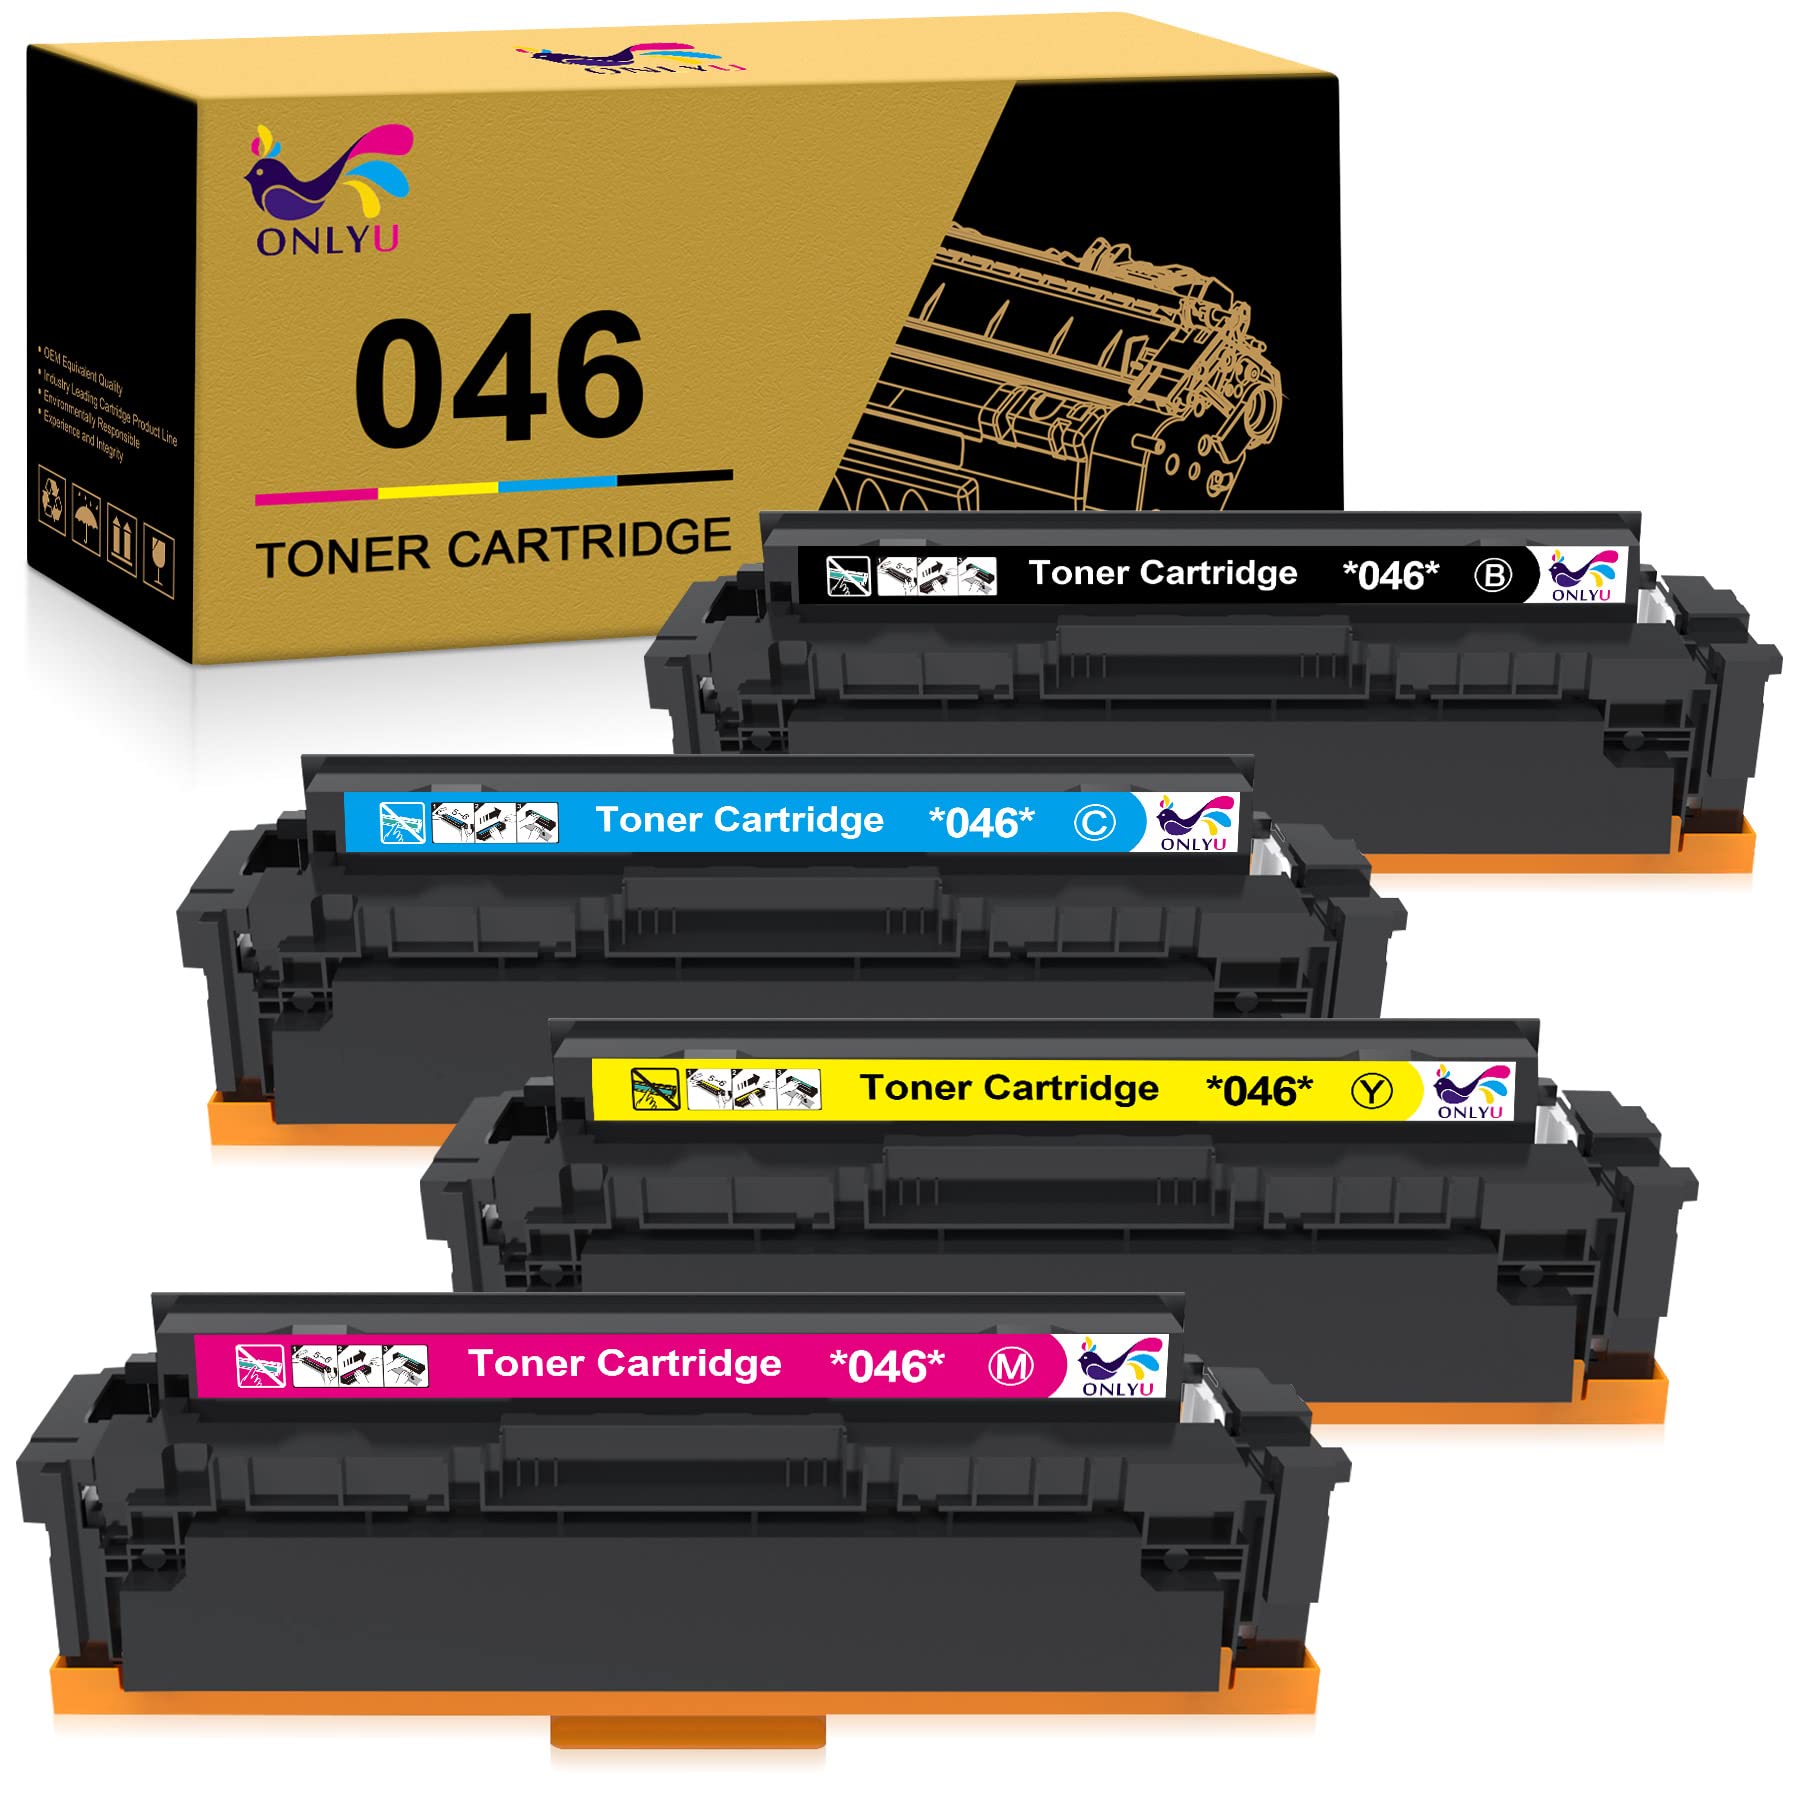 OTHERS COMPATABLE TONER HP-046A YELLOW